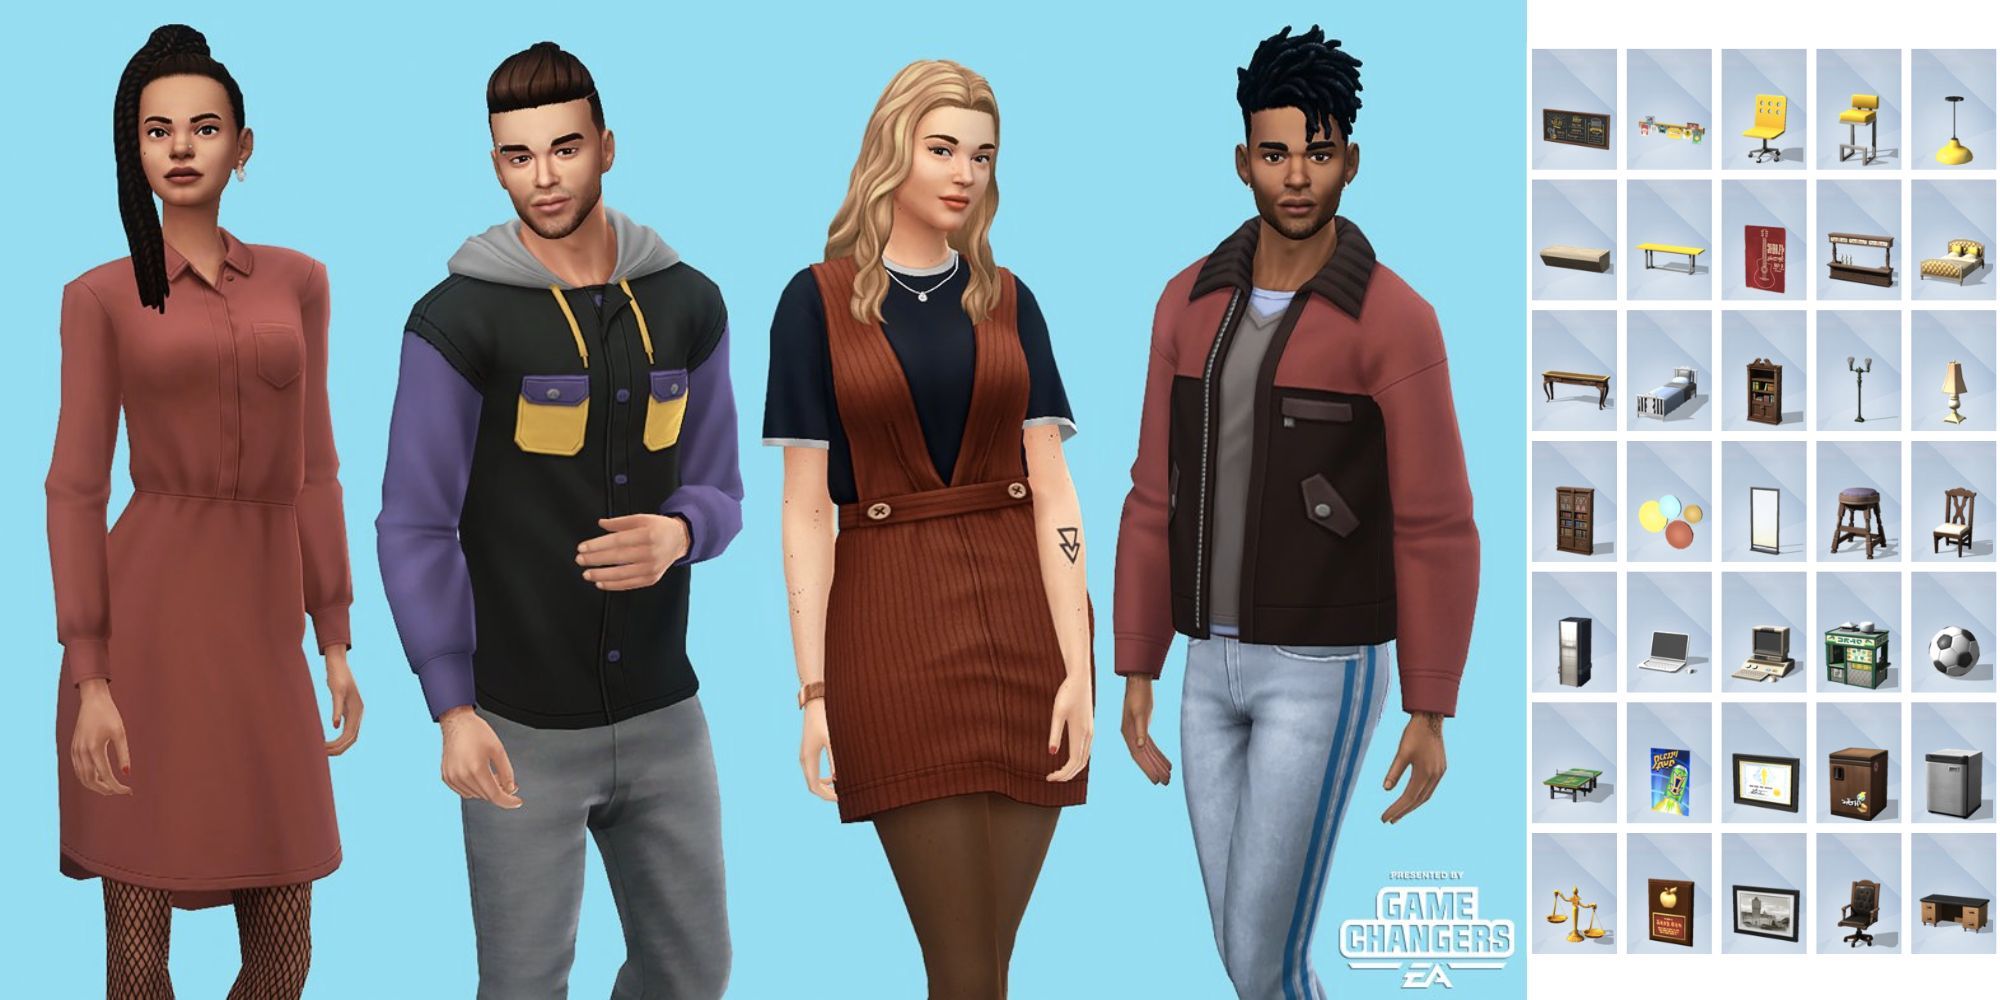 The Sims 4 Discover University CAS Build_Buy Items-1